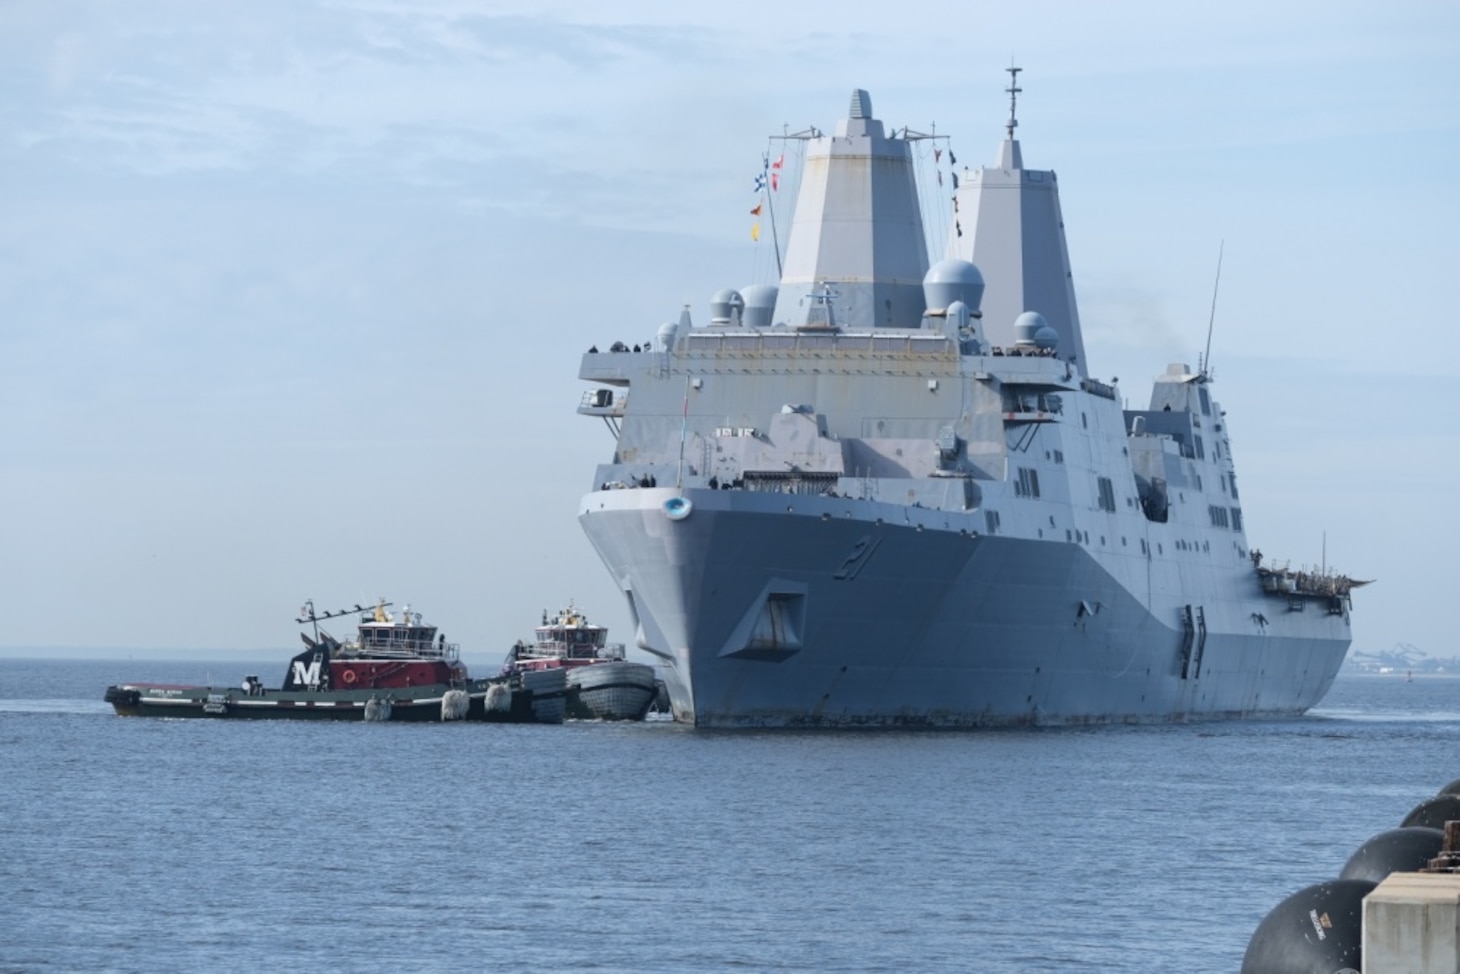 NORFOLK, Va. (Nov. 22, 2020) The San Antonio-class amphibious transport dock USS New York (LPD 21) arrives at Naval Station Norfolk, Nov. 22, 2020 concluding the ship’s homeport shift from Mayport, Florida to Virginia. The arrival of New York is part of a series of planned homeport shifts set to occur over the next few years, which will consolidate Mayport based amphibious ships in the Hampton Roads area in exchange for increasing the number of guided-missile destroyers in the Mayport area. (U.S. Navy photo by Mass Communication Specialist 1st Class Joshua D. Sheppard)